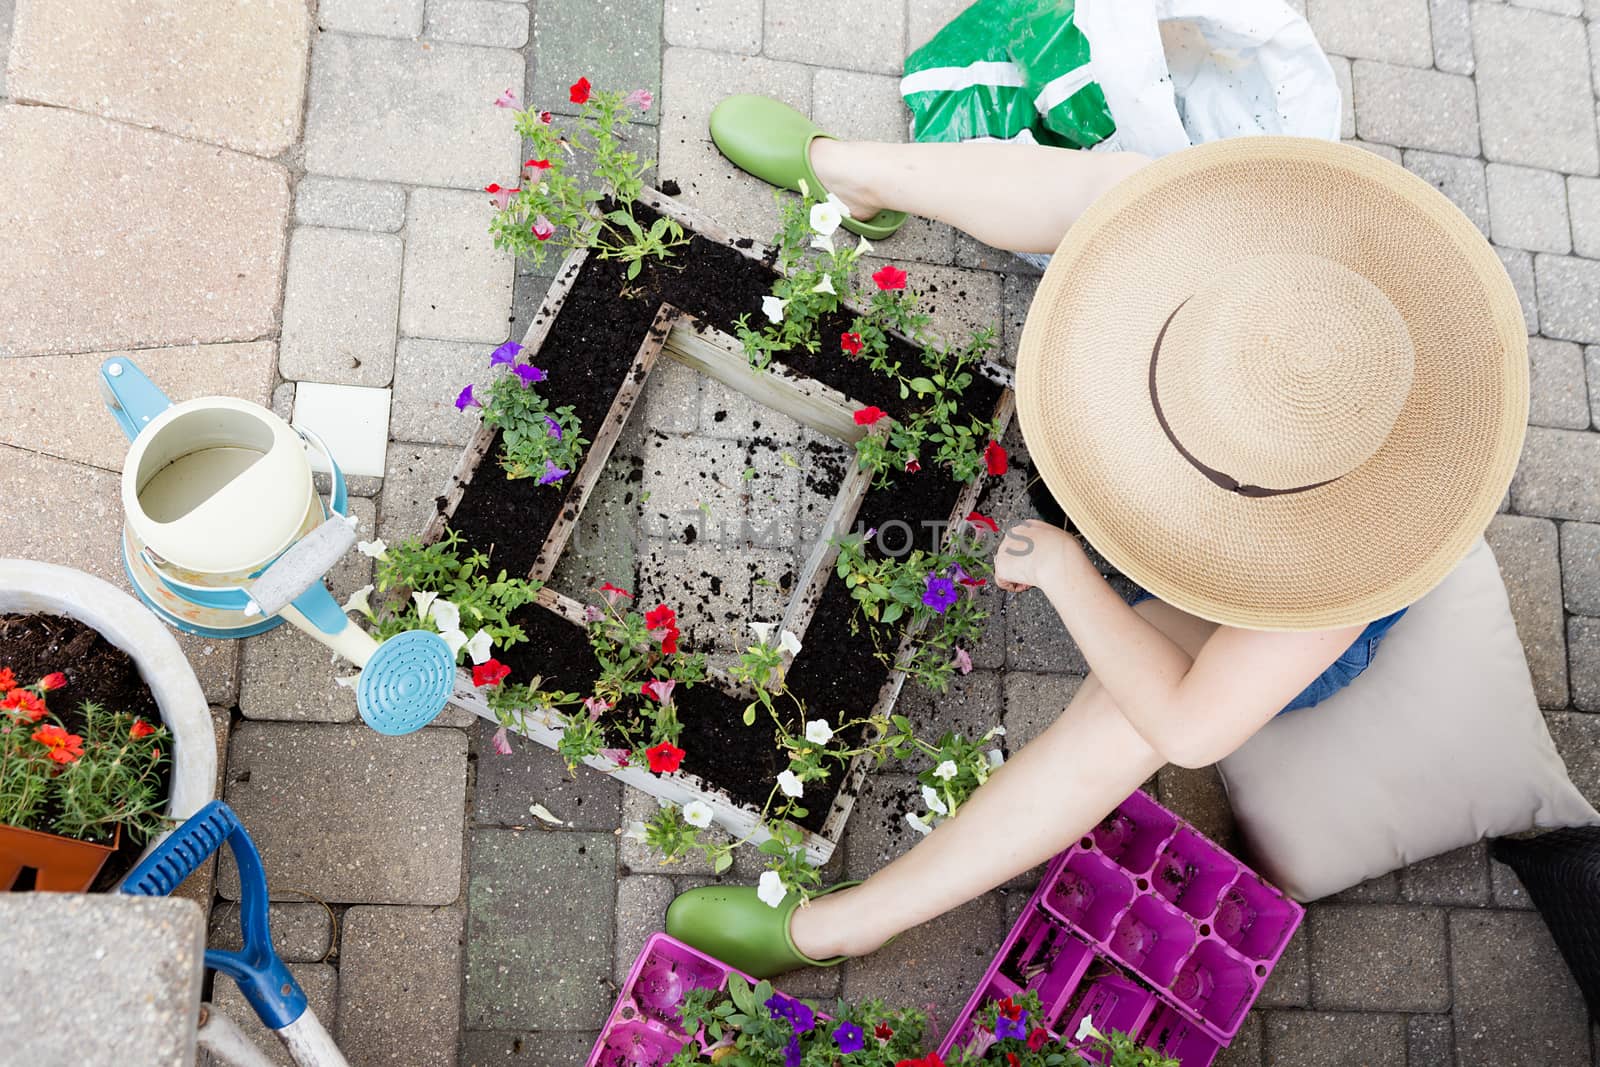 Lady gardener sitting on her brick patio in a wide brimmed straw hat transplanting colorful red and white petunias into a decorative square flowerpot at the start of spring, view from above